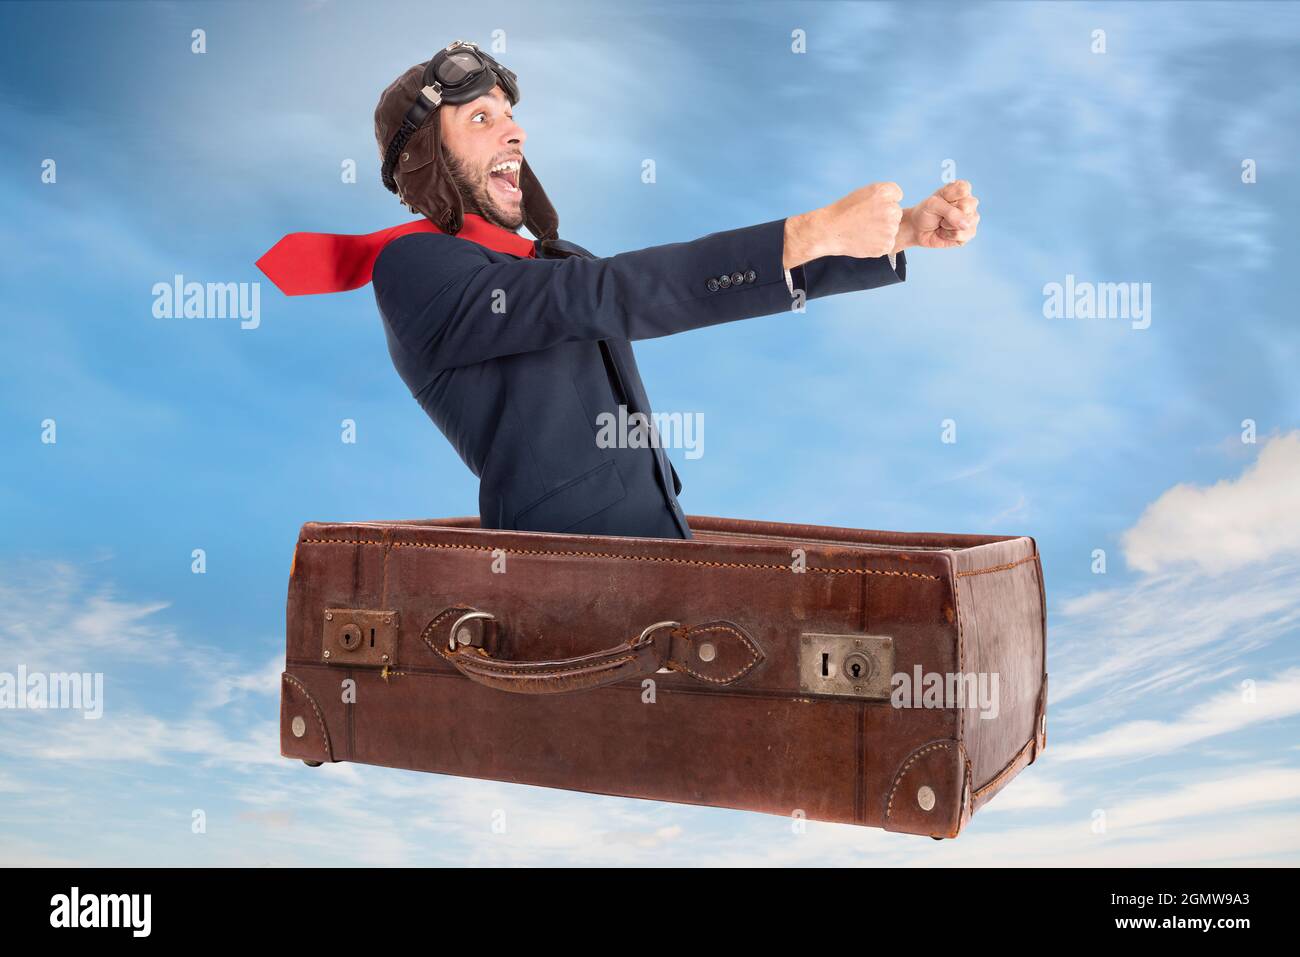 Businessman flying an old suitcase over the skies Stock Photo